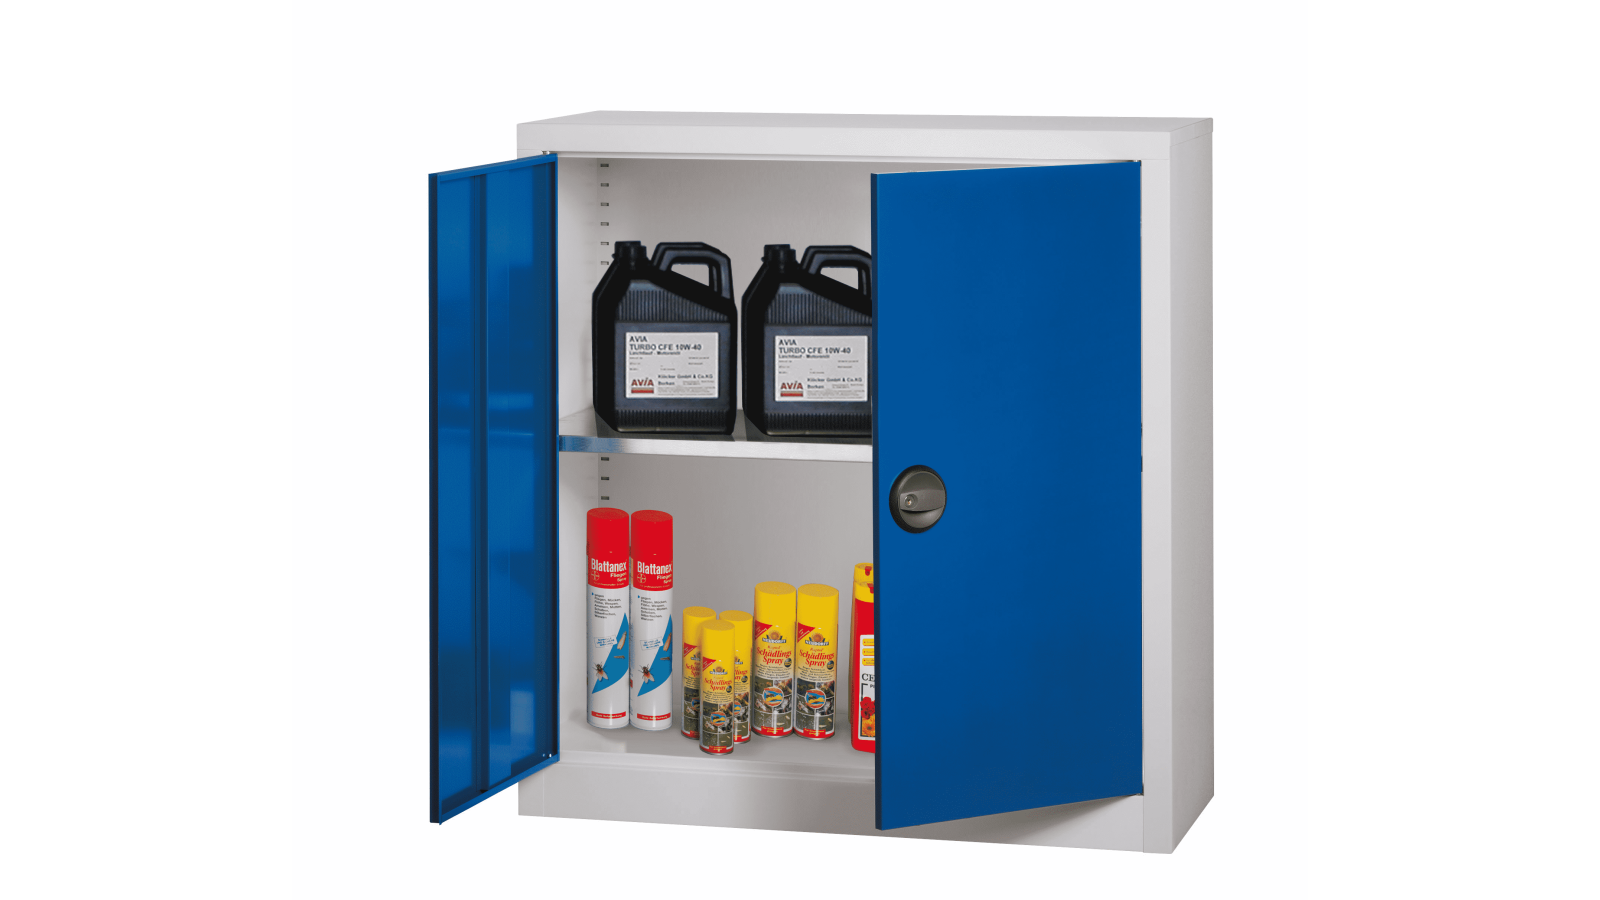 Armoire phytosanitaire de type SIW